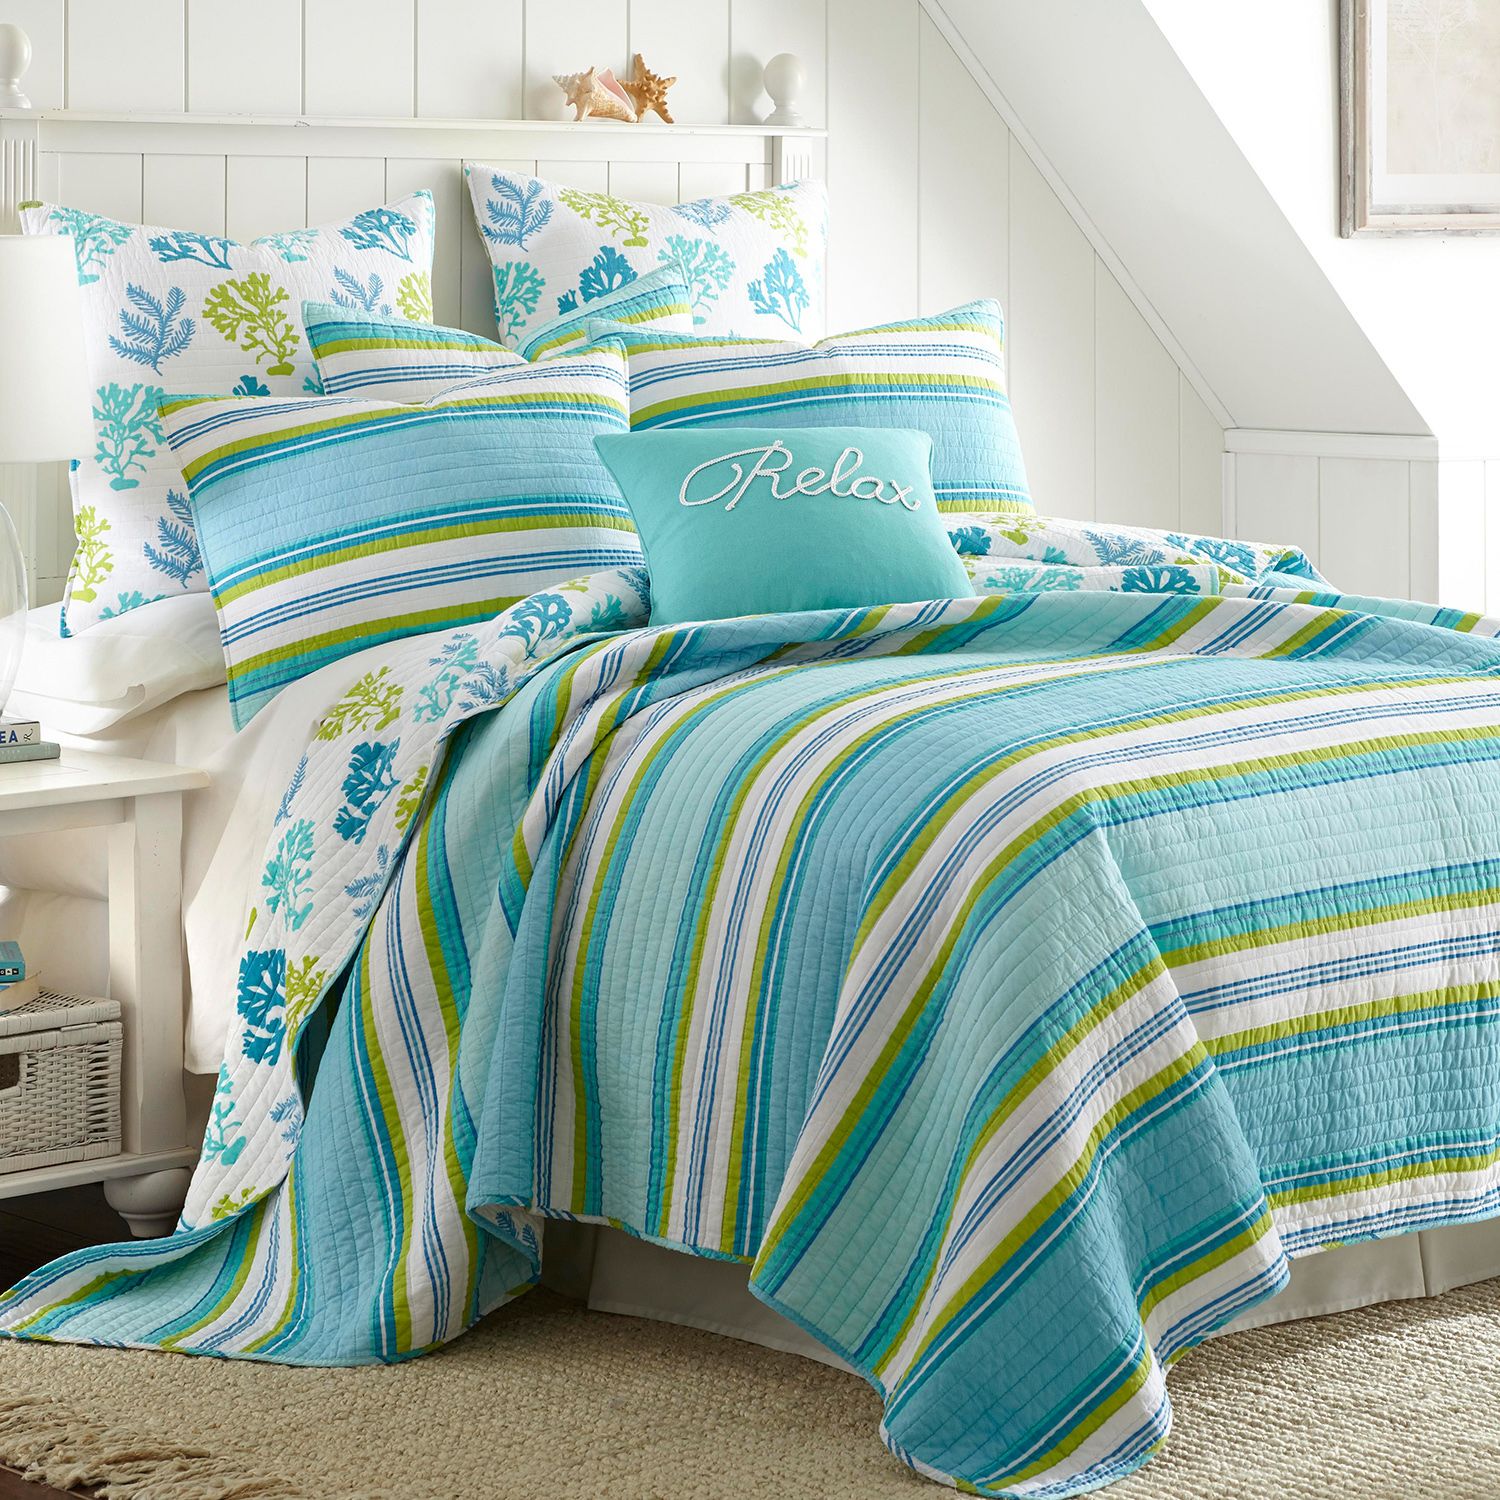 Image for Levtex Home Cozumel Reversible Quilt Collection at Kohl's.